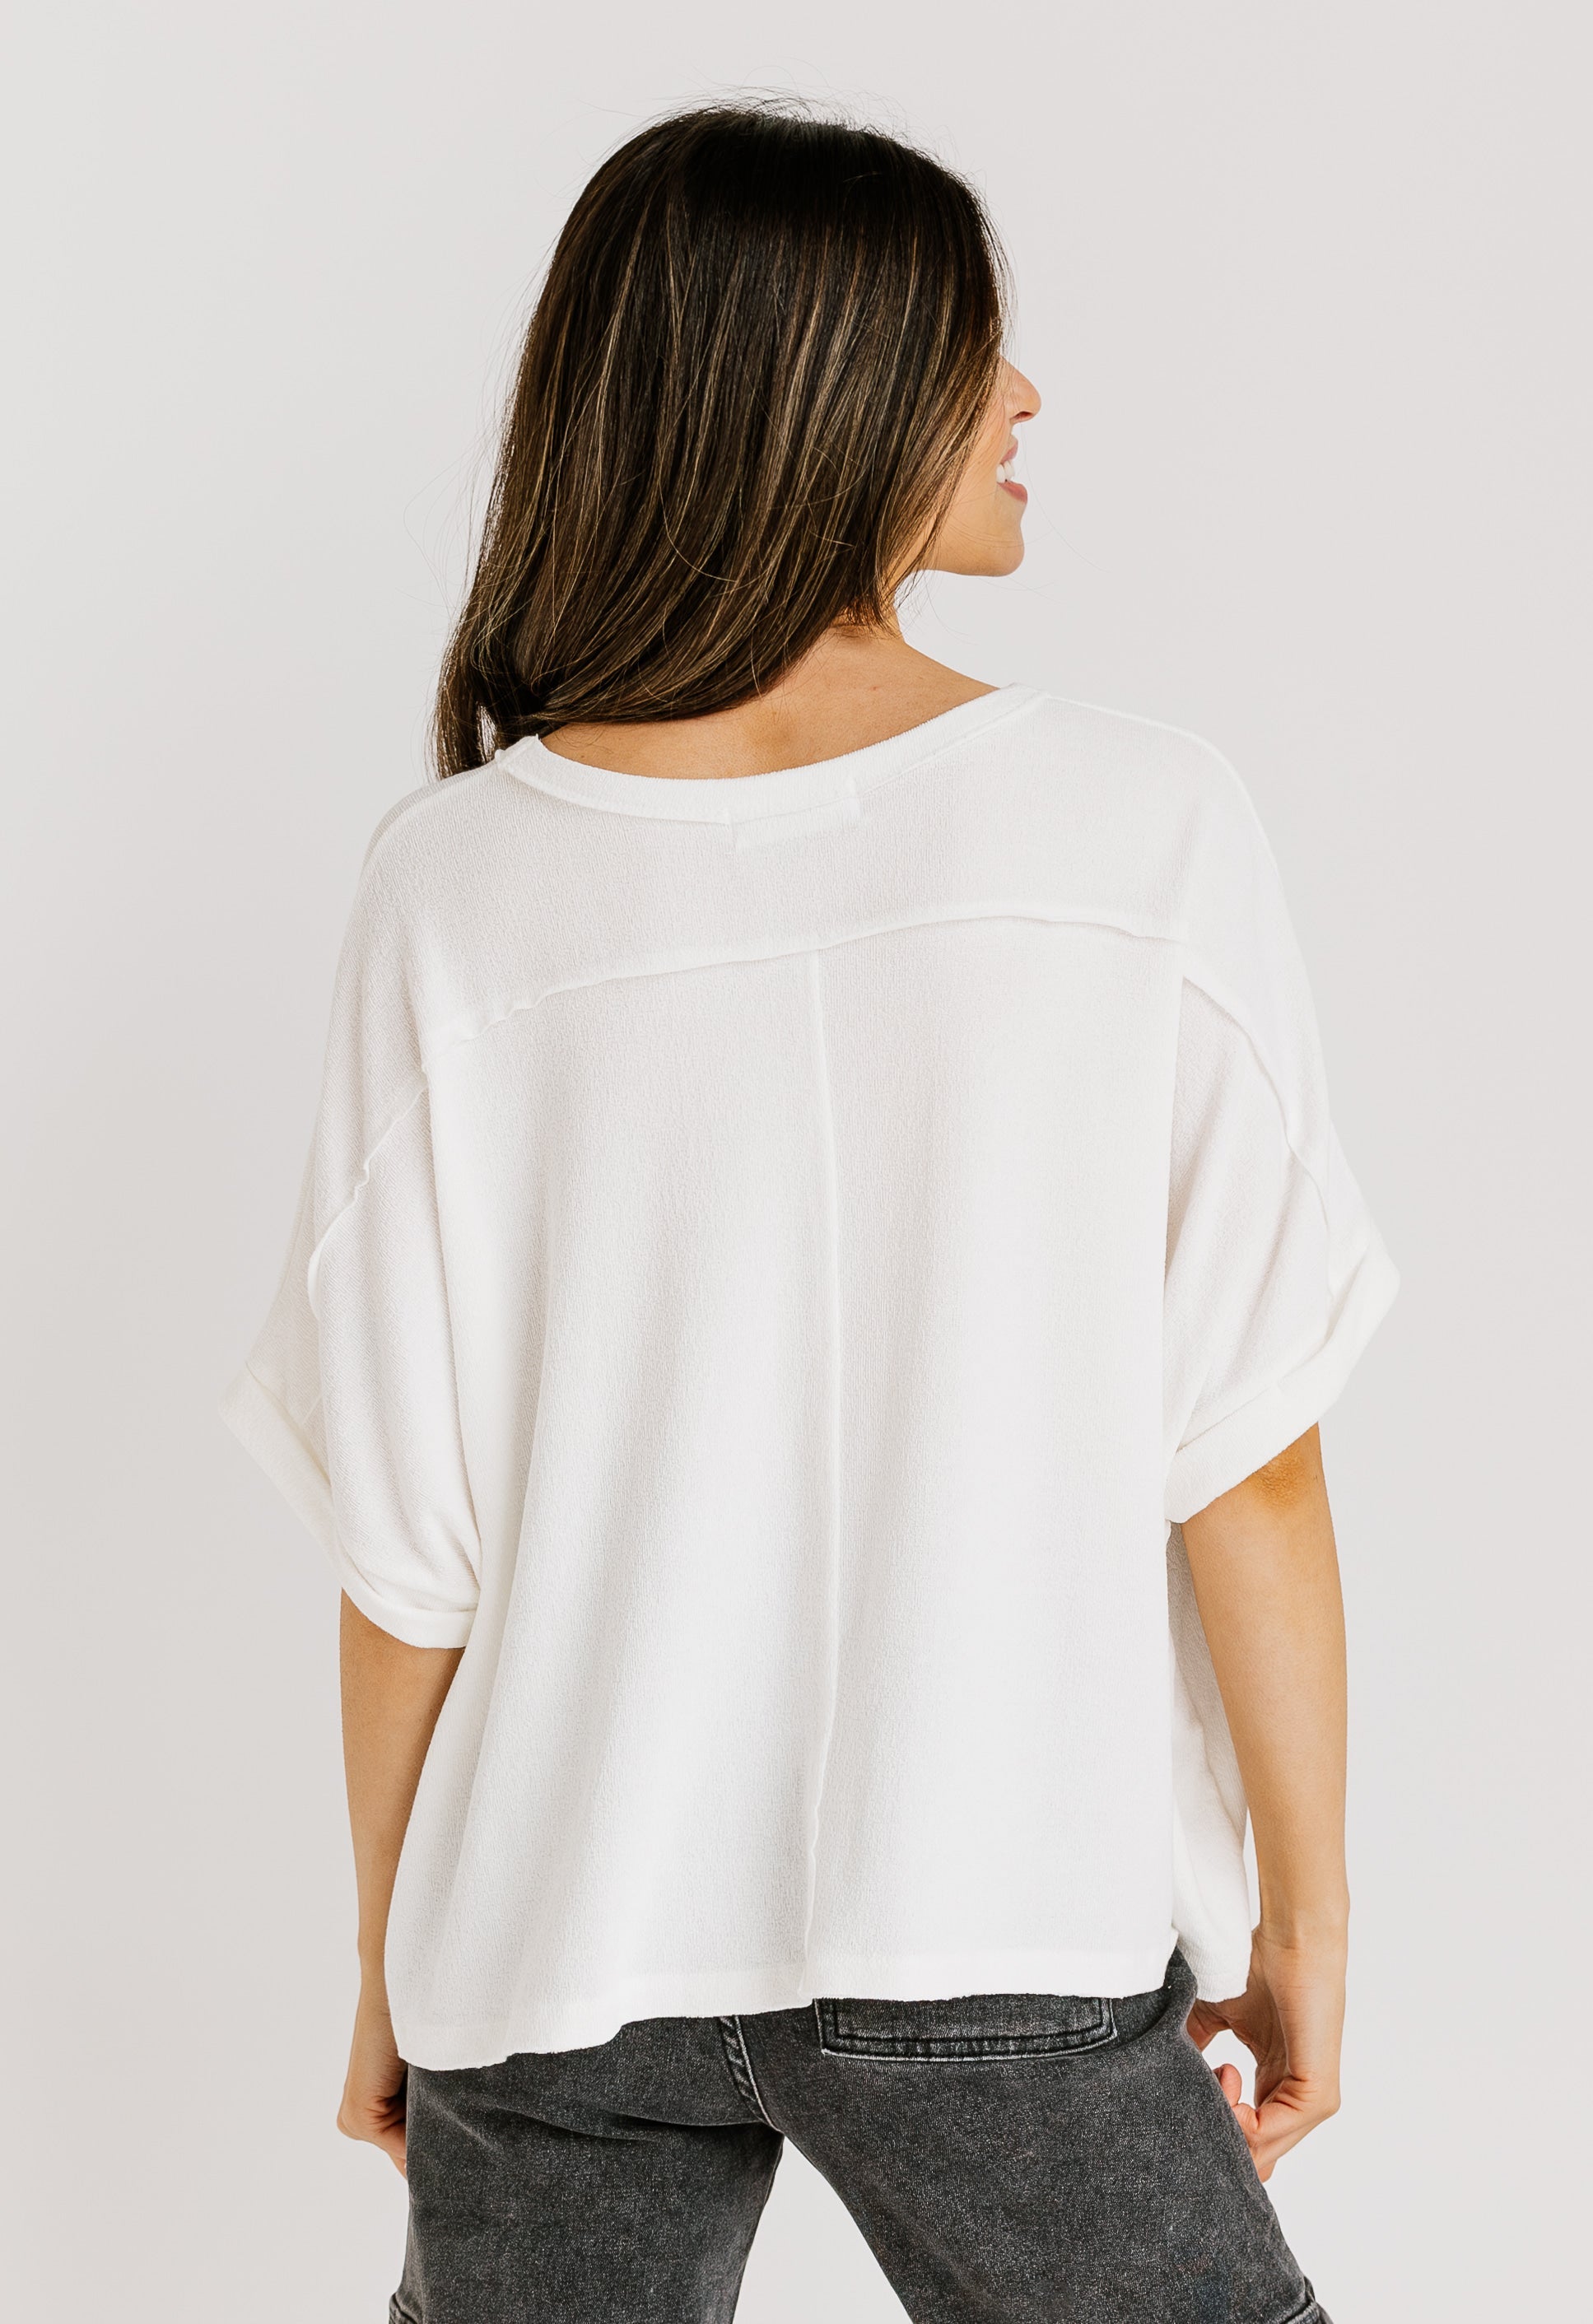 Trista Top - WHITE - willows clothing S/S Shirt